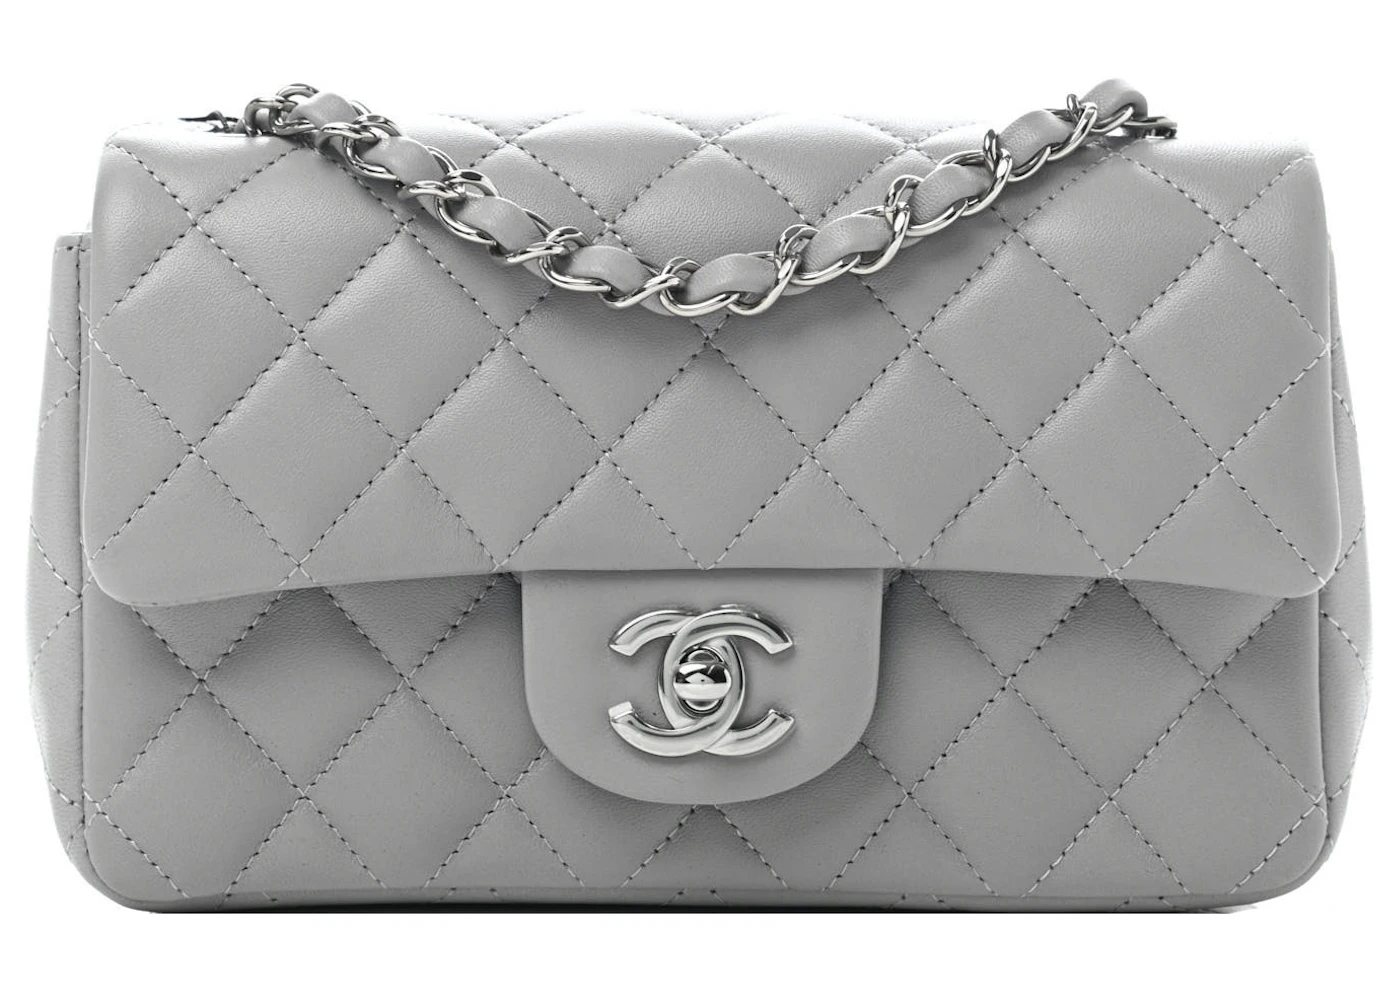 Chanel Light Grey Quilted Lambskin Mini Square Classic Flap Bag, myGemma, CH